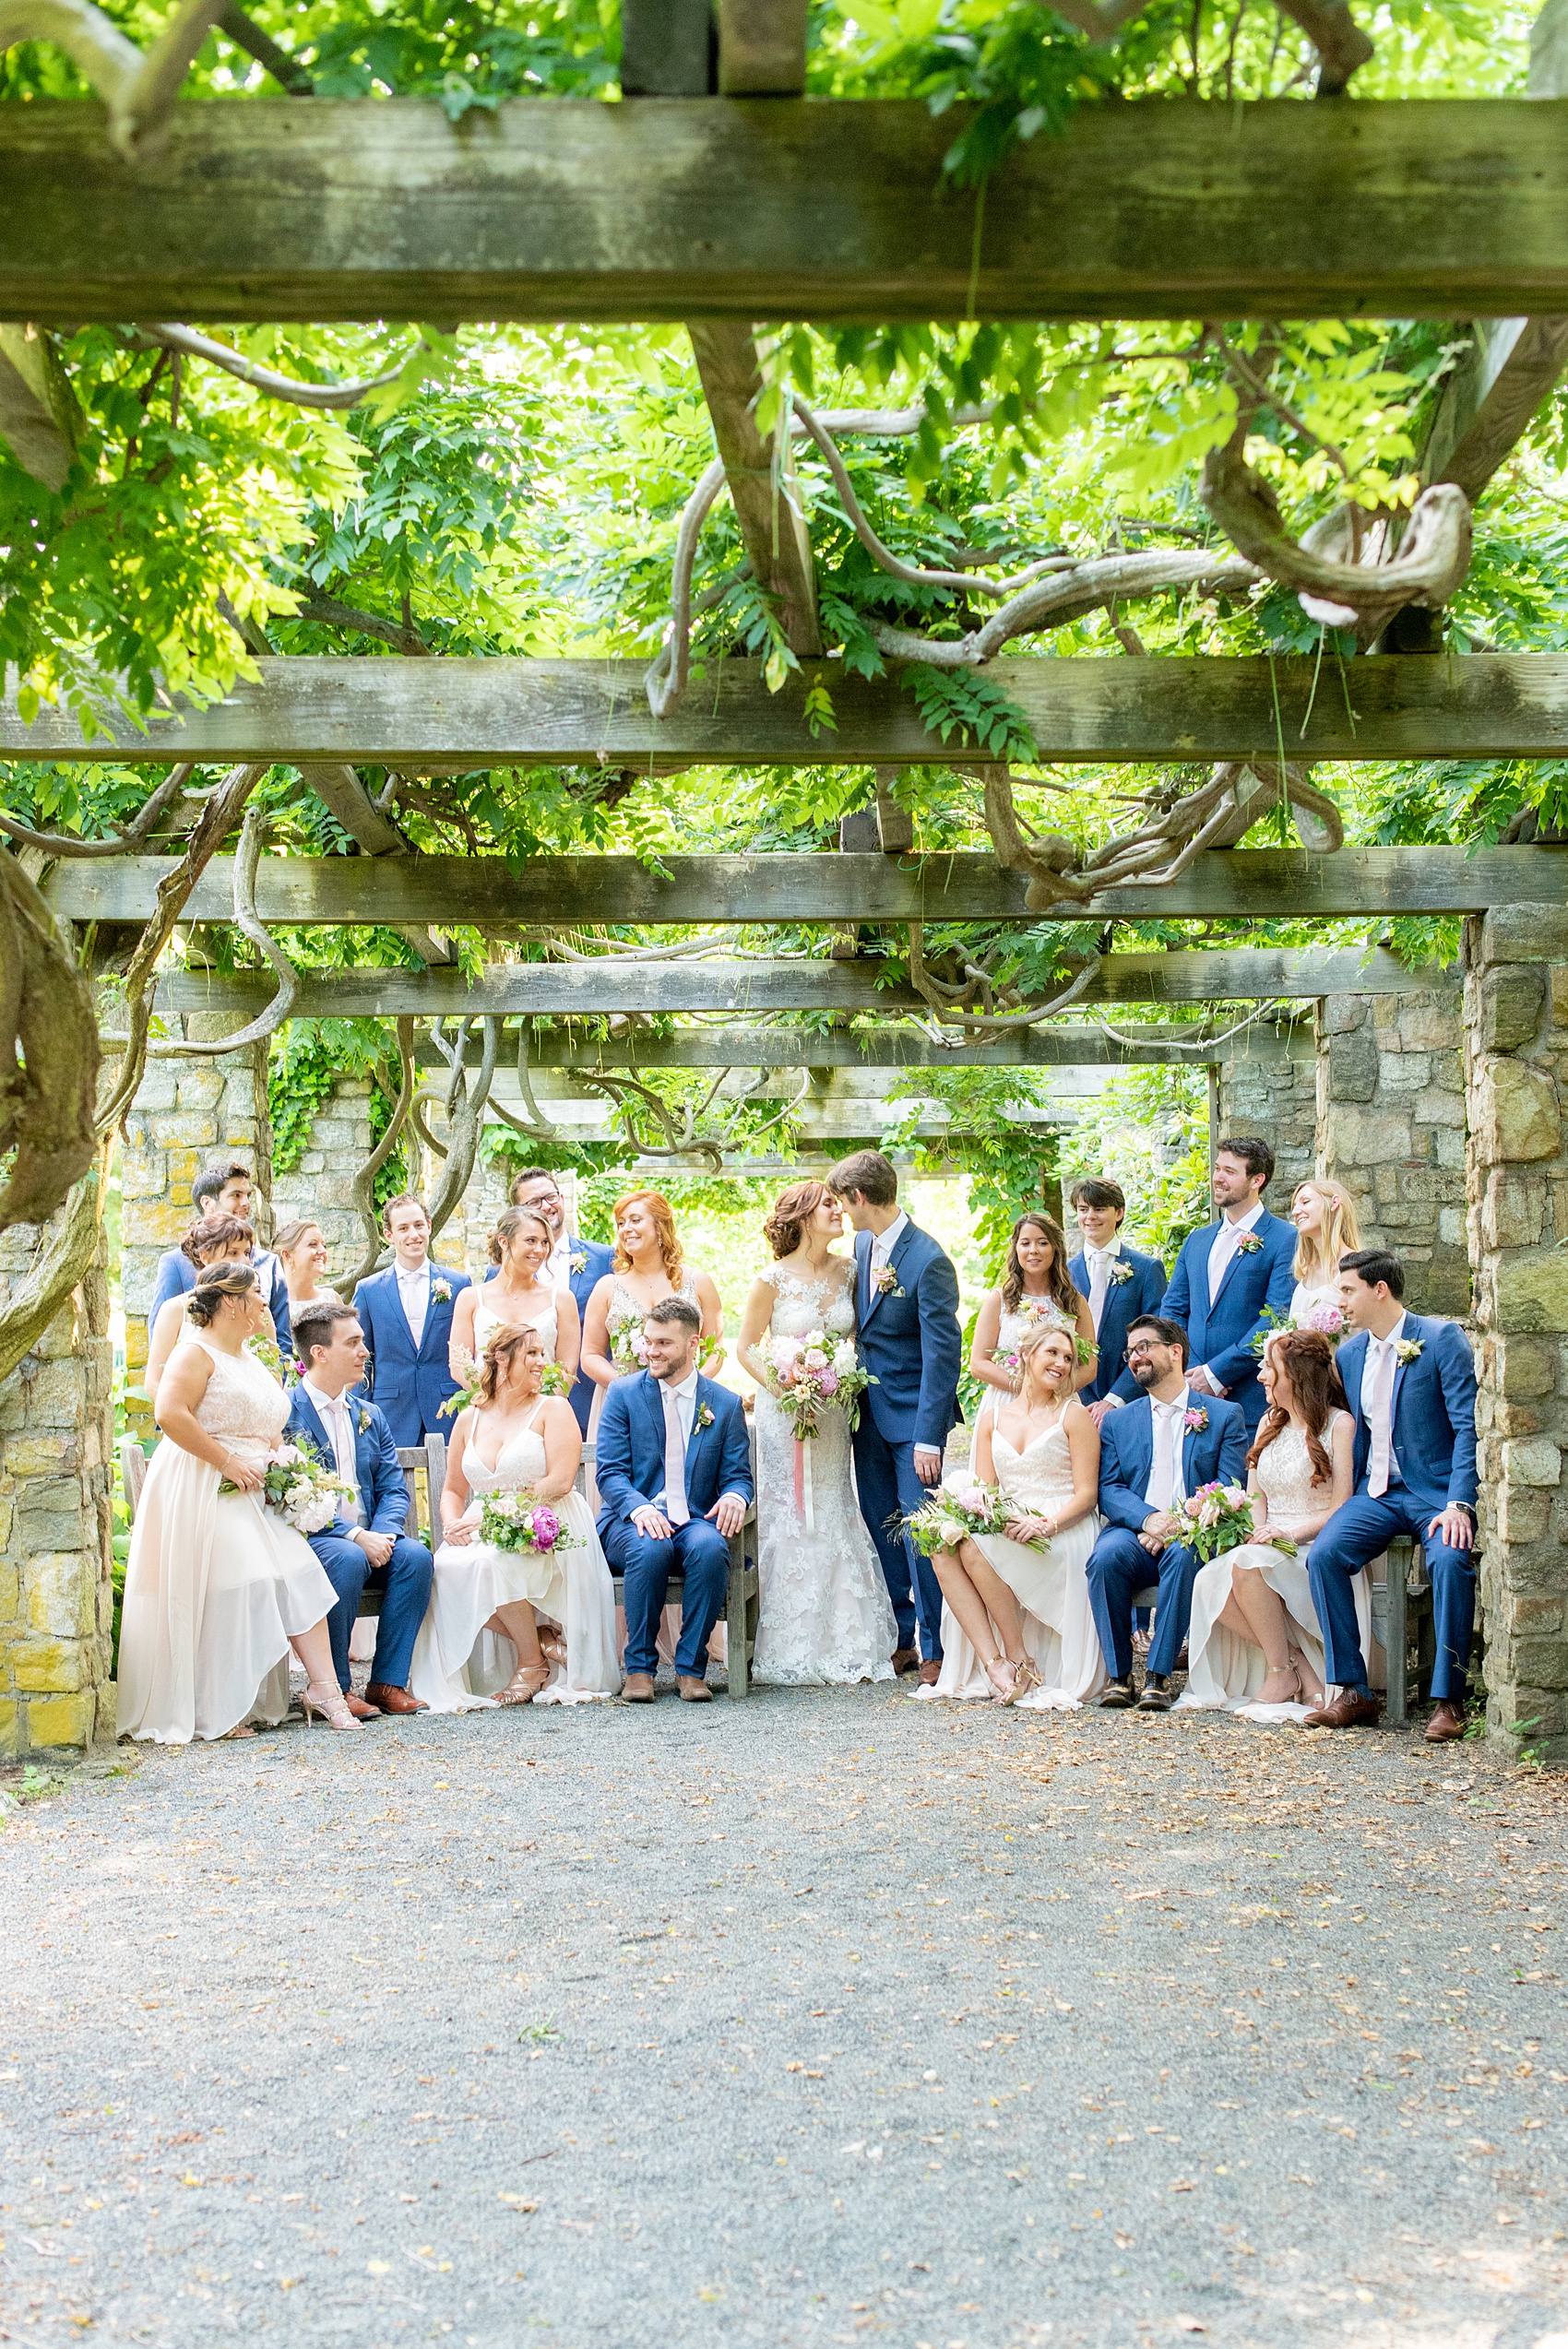 A summer wedding at Olde Mill Inn, NJ. Photos by Mikkel Paige Photography. This New Jersey venue is a great option for an event not too far from NYC. The wedding party photos were at nearby Cross Estate Gardens, a beautiful lush area for bridal party and groomsmen photos. The bridesmaids wore light pink, mis-matched gowns and the guys wore blue suits with pink ties in this unique, Vogue-like picture. Click through for their complete wedding recap! #OldeMillInn #NJwedding #NJweddingphotographer #mikkelpaige #NewJerseyWeddingVenue #NewJerseyWedding #CrossEstateGardens #weddingdetails #bridalparty #pinkbridesmaids #mismatcheddresses #bluesuits #groomsmen